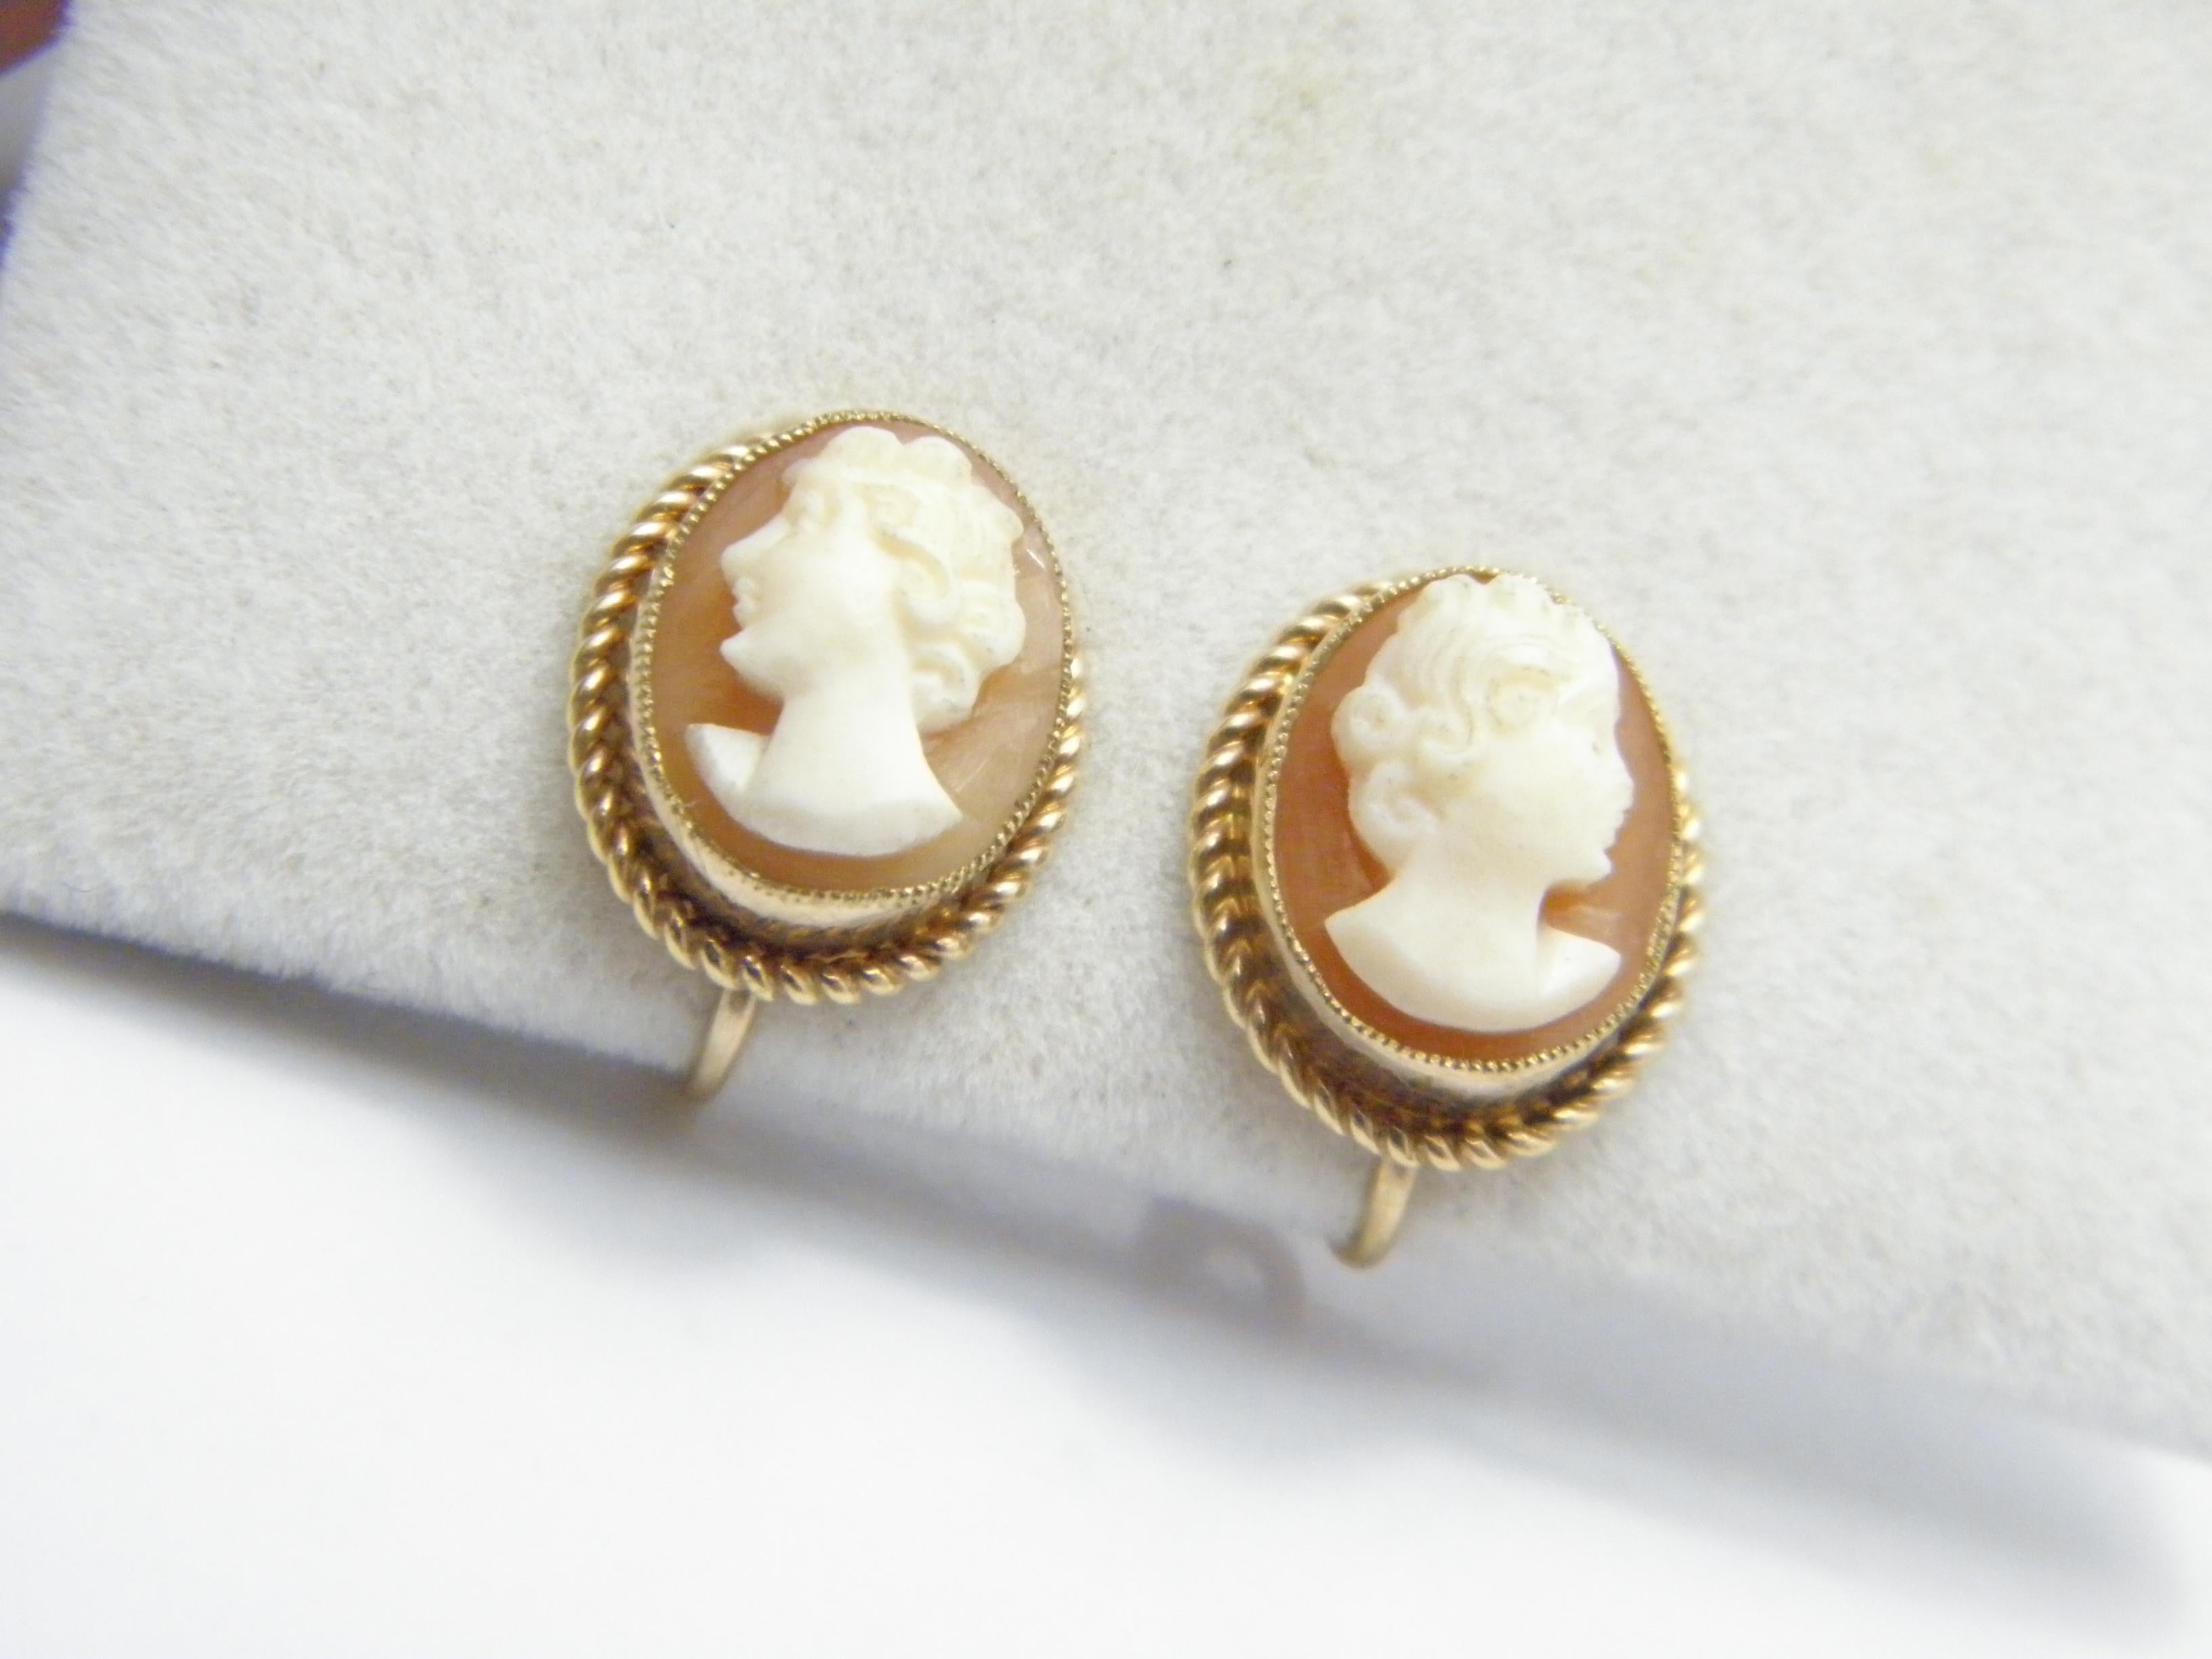 A very special item for you to consider:

9CT GOLD LARGE SHELL CAMEO SCREW BACK STUD EARRINGS

DETAILS
Material: 375/1000 9ct Solid Gold
Style: Classic Cameo earrings with hand carved Conch shell of lady in relief
Gemstones: Orange and white hand